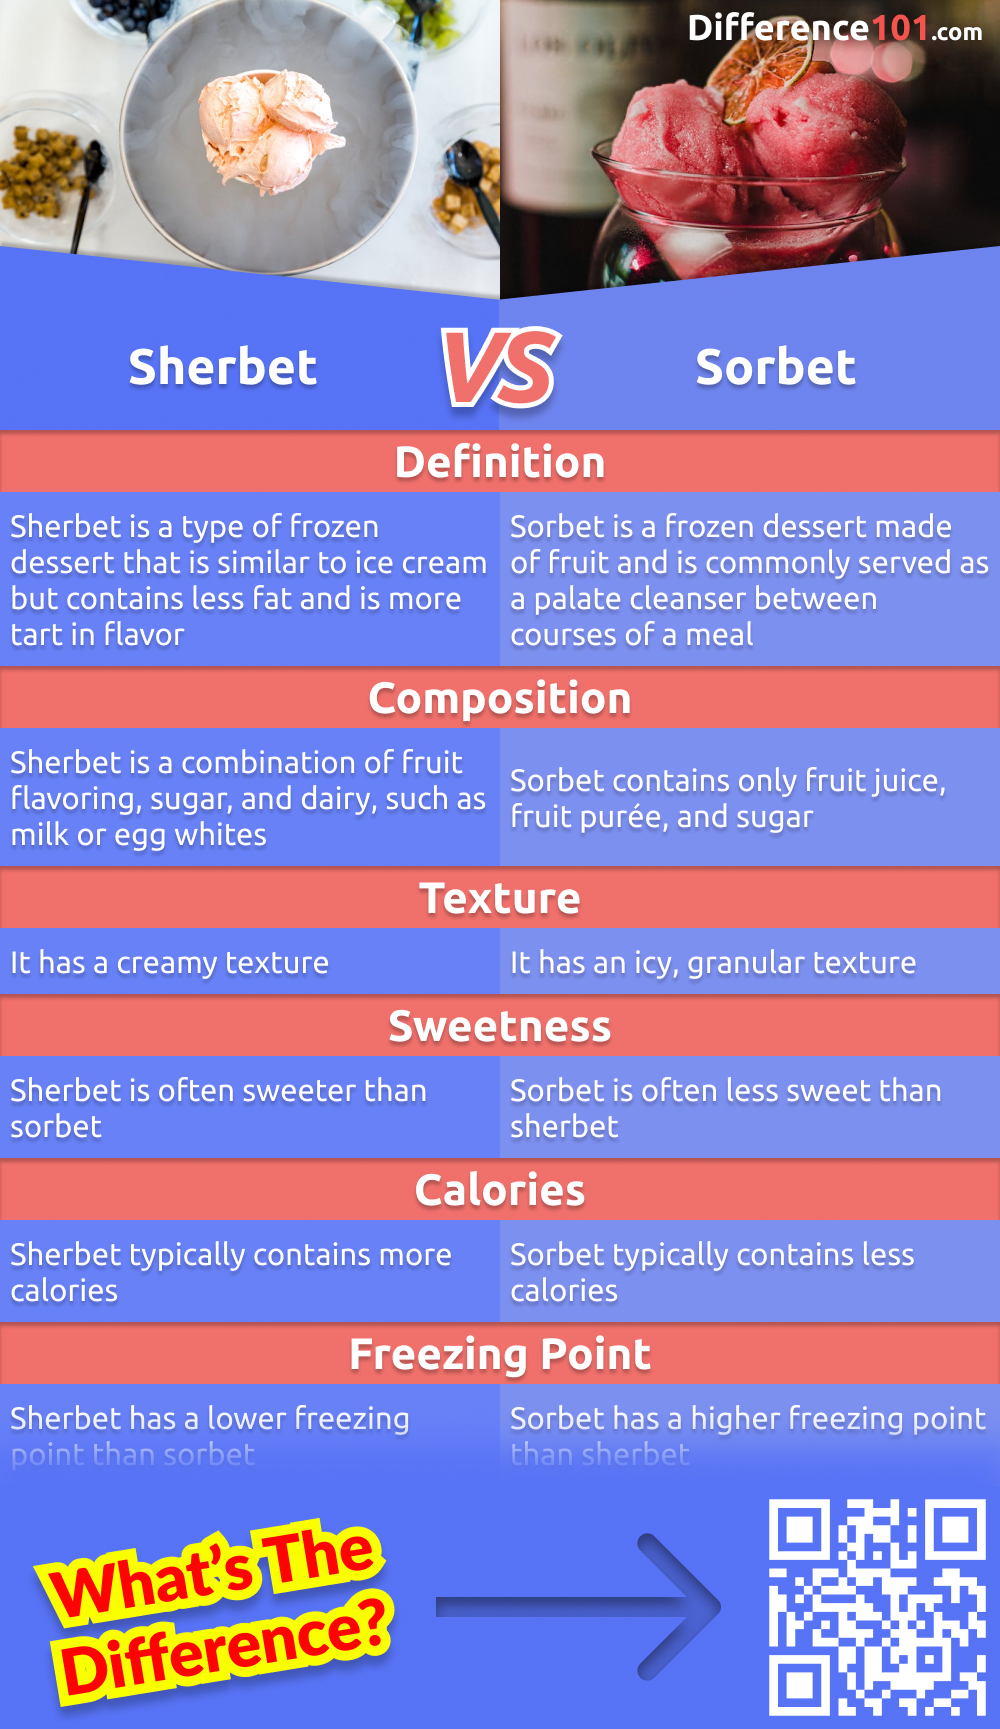 What's the difference between sherbet and sorbet? Read on to learn about the key differences between these two types of frozen desserts, as well as the pros, cons of each and similarities.